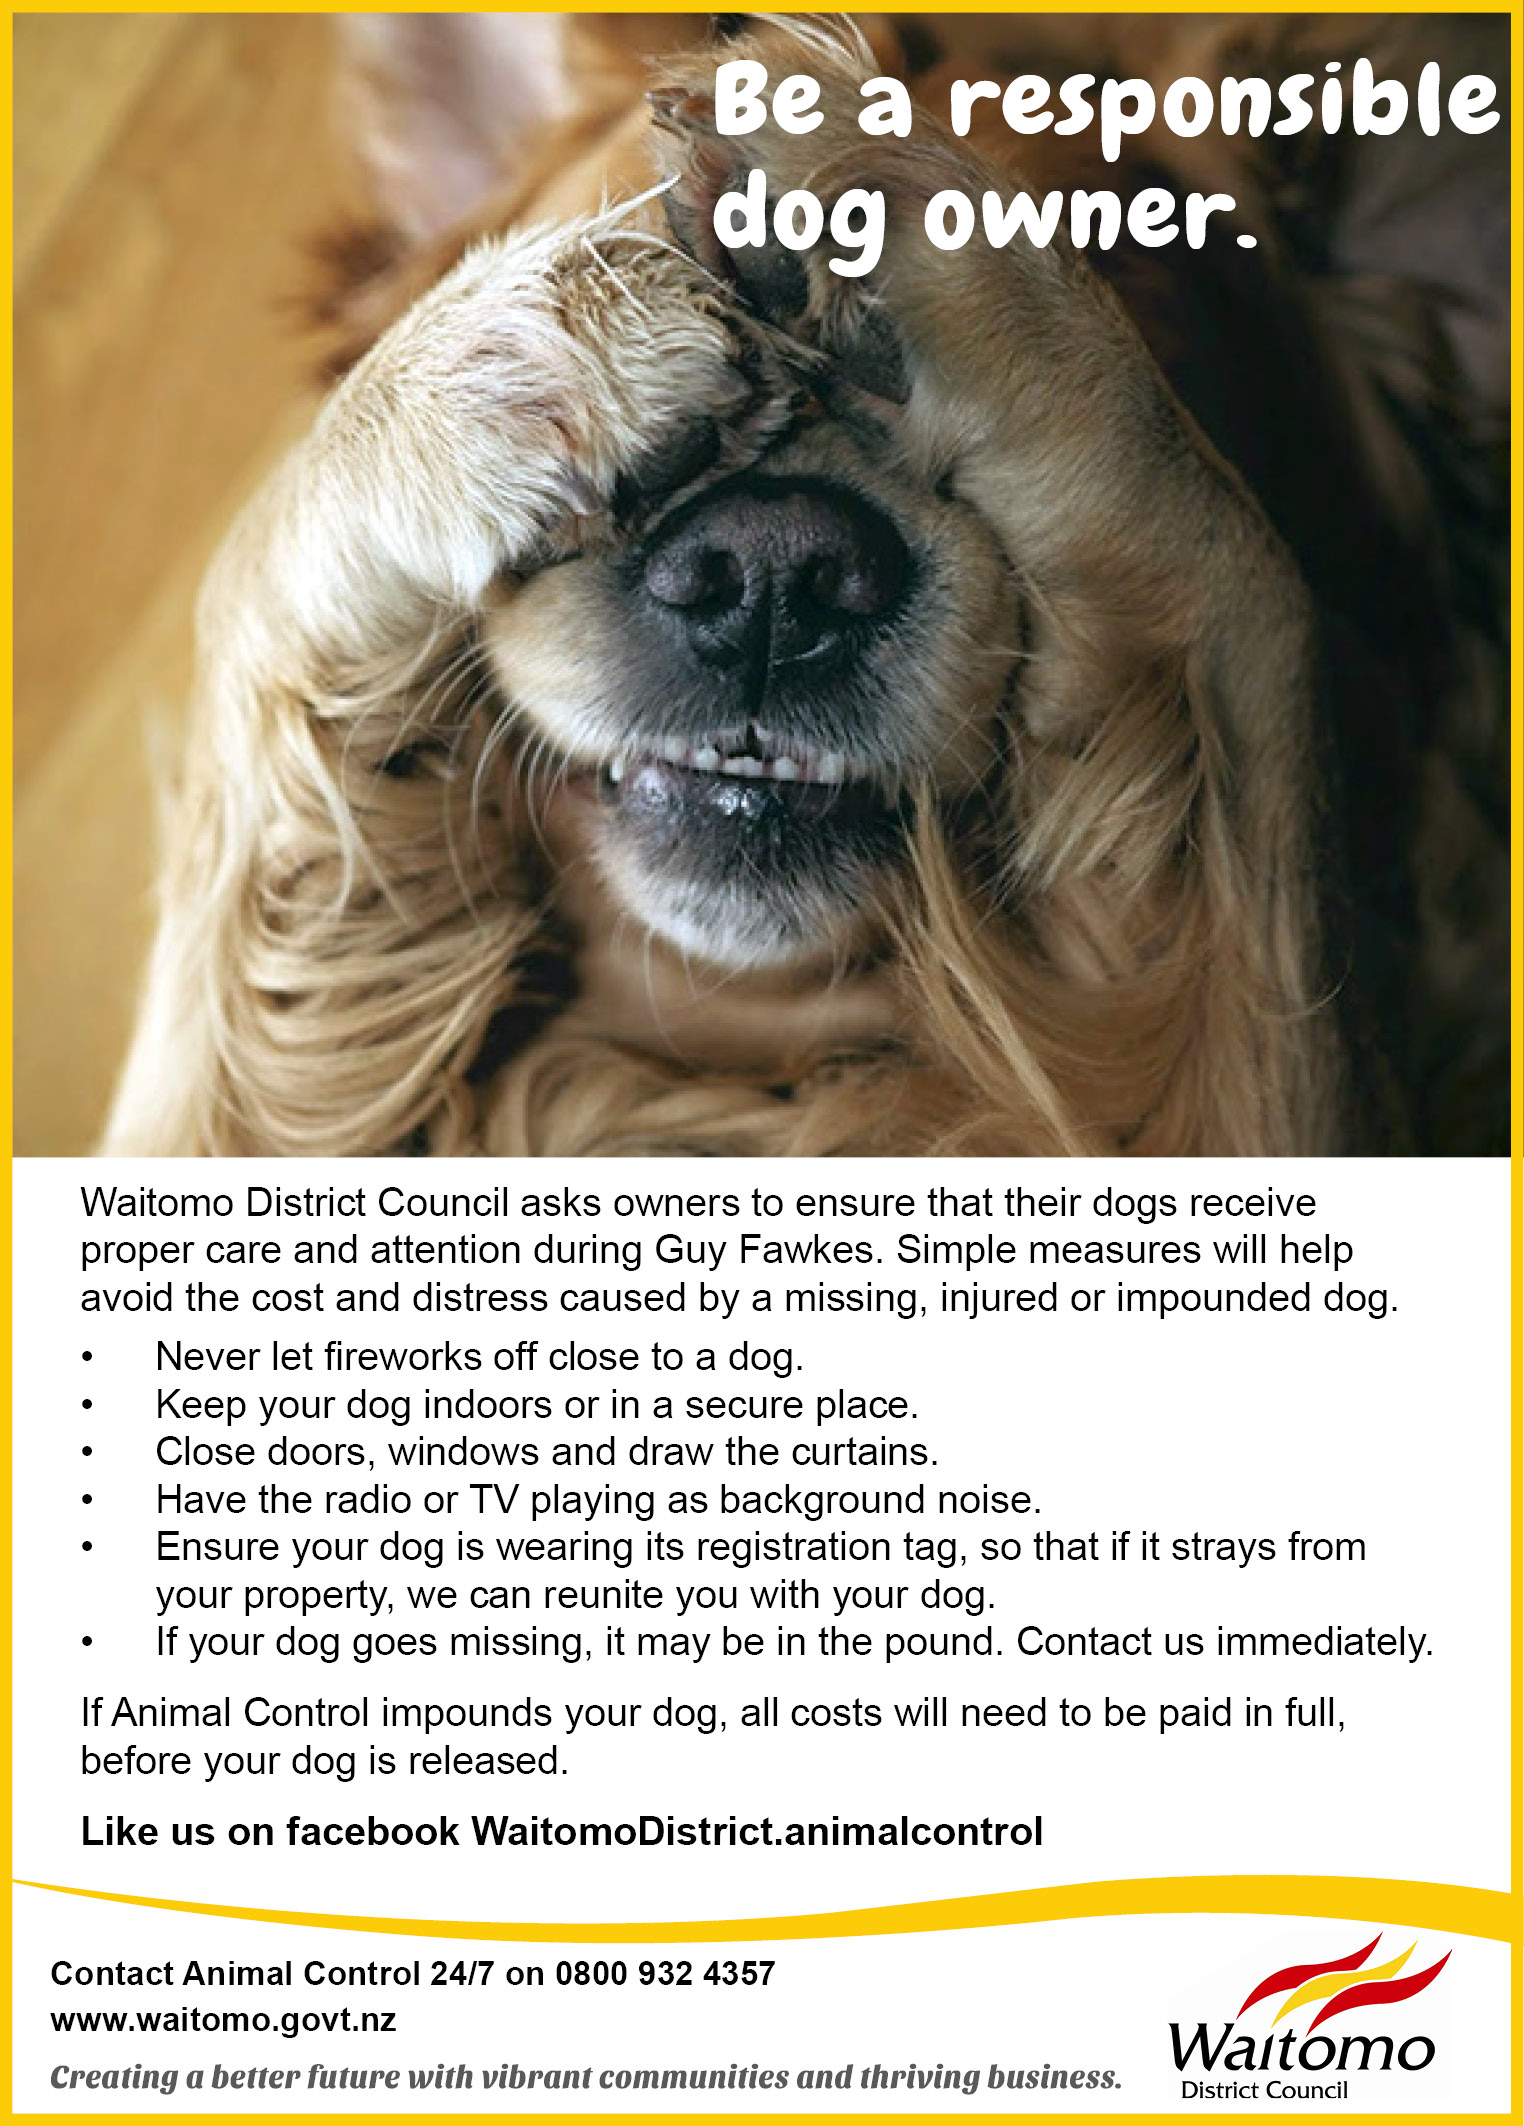 Waitomo District Animal Control_Be a responsible dog owner advert